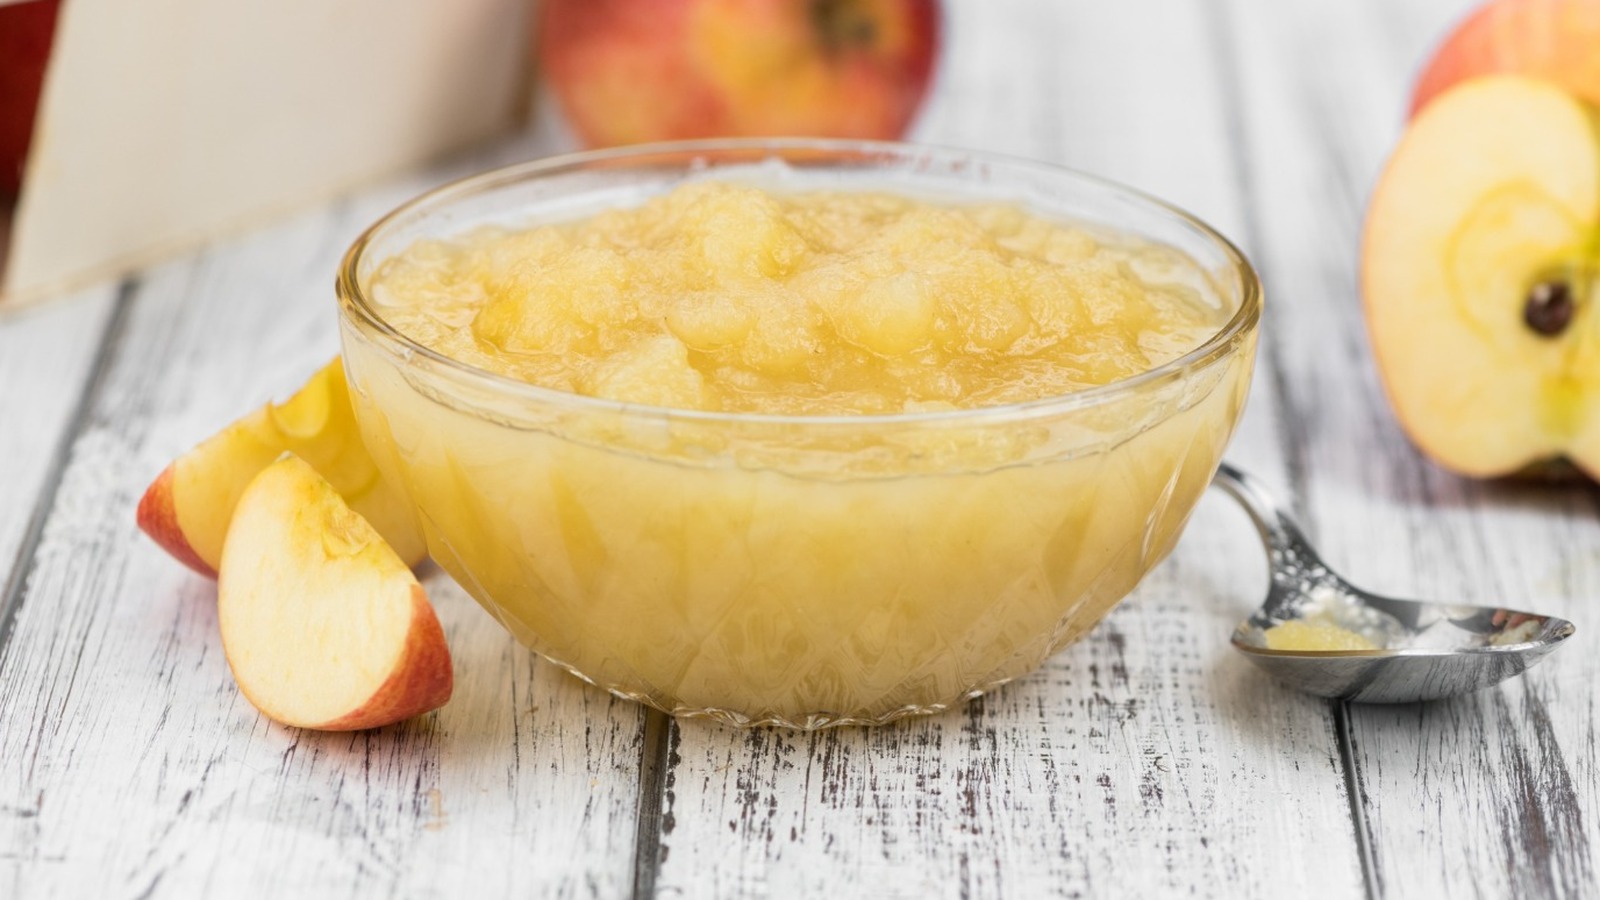 Is Applesauce Good For You?